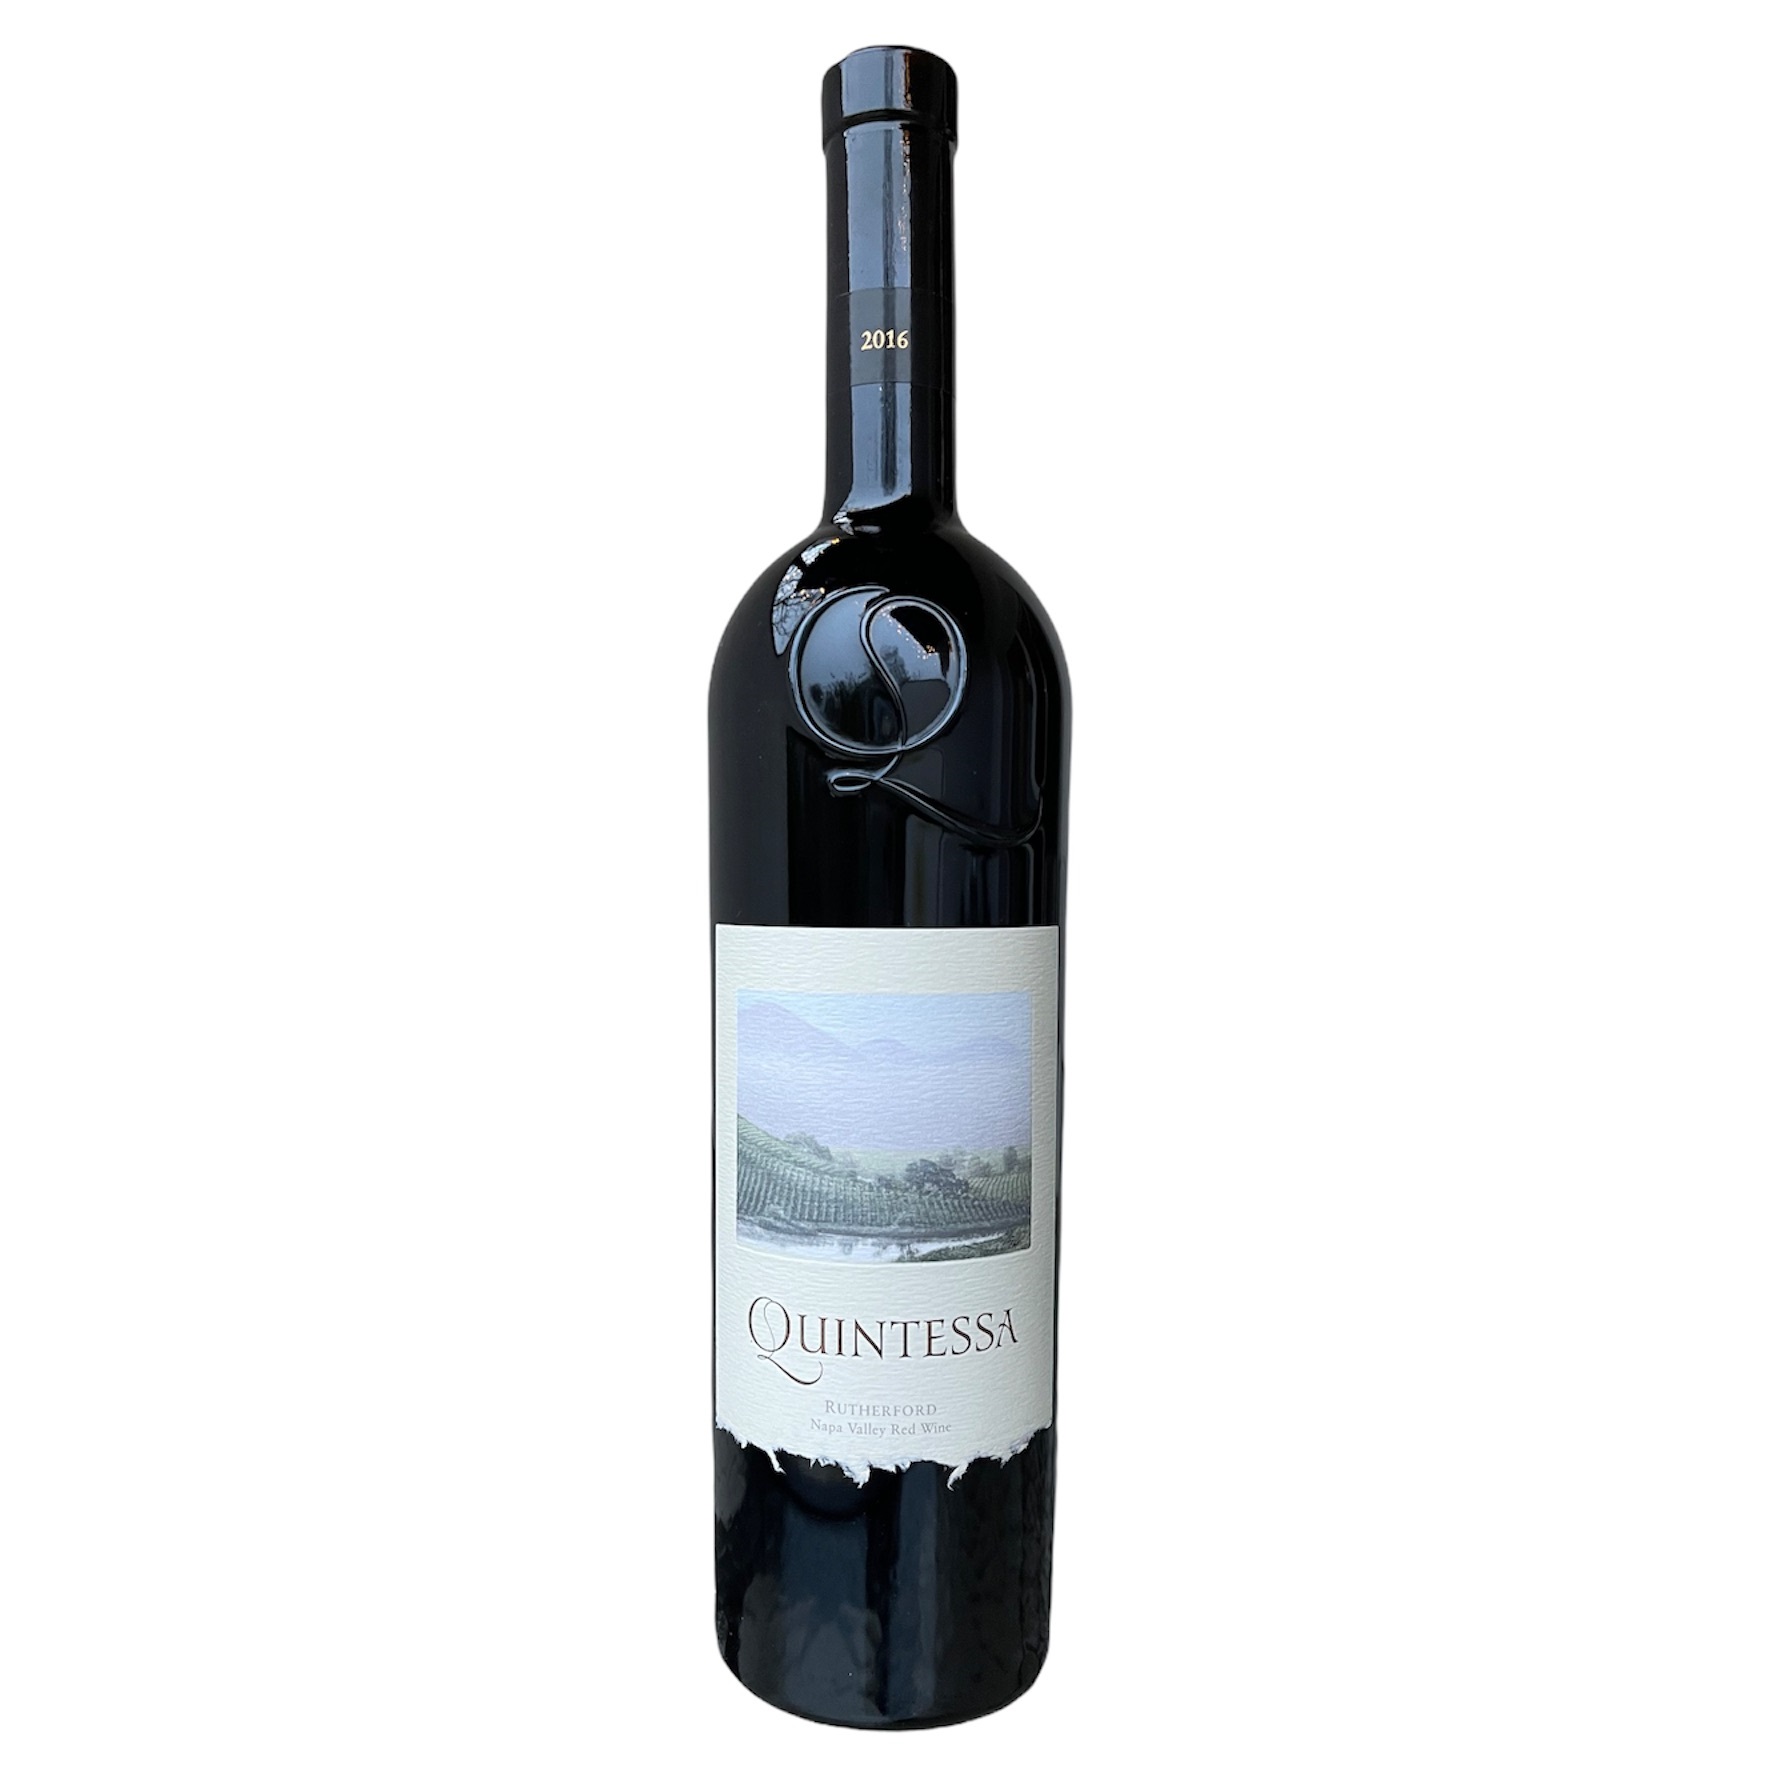 Quintessa Rutherford Napa Valley Red Wine 2016